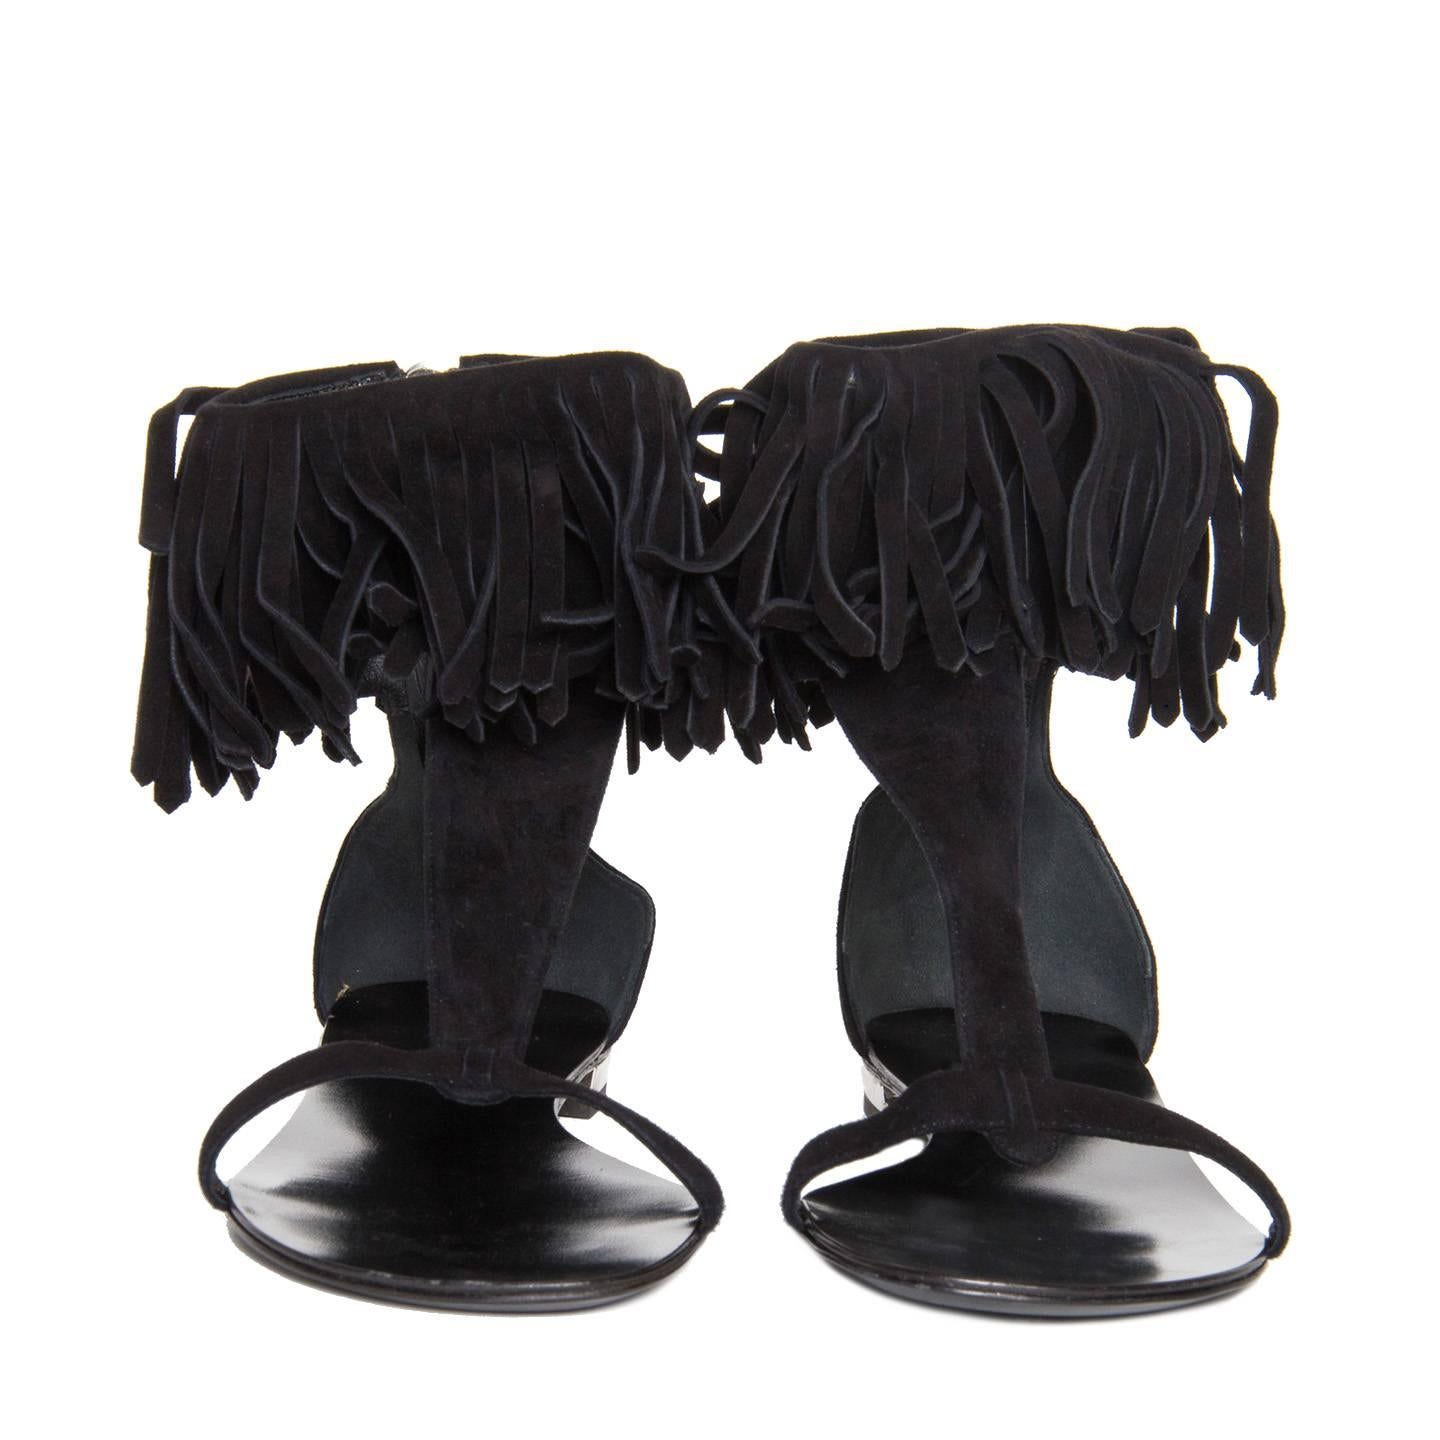 Balmain Black Suede Fringed Sandals In New Condition For Sale In Brooklyn, NY